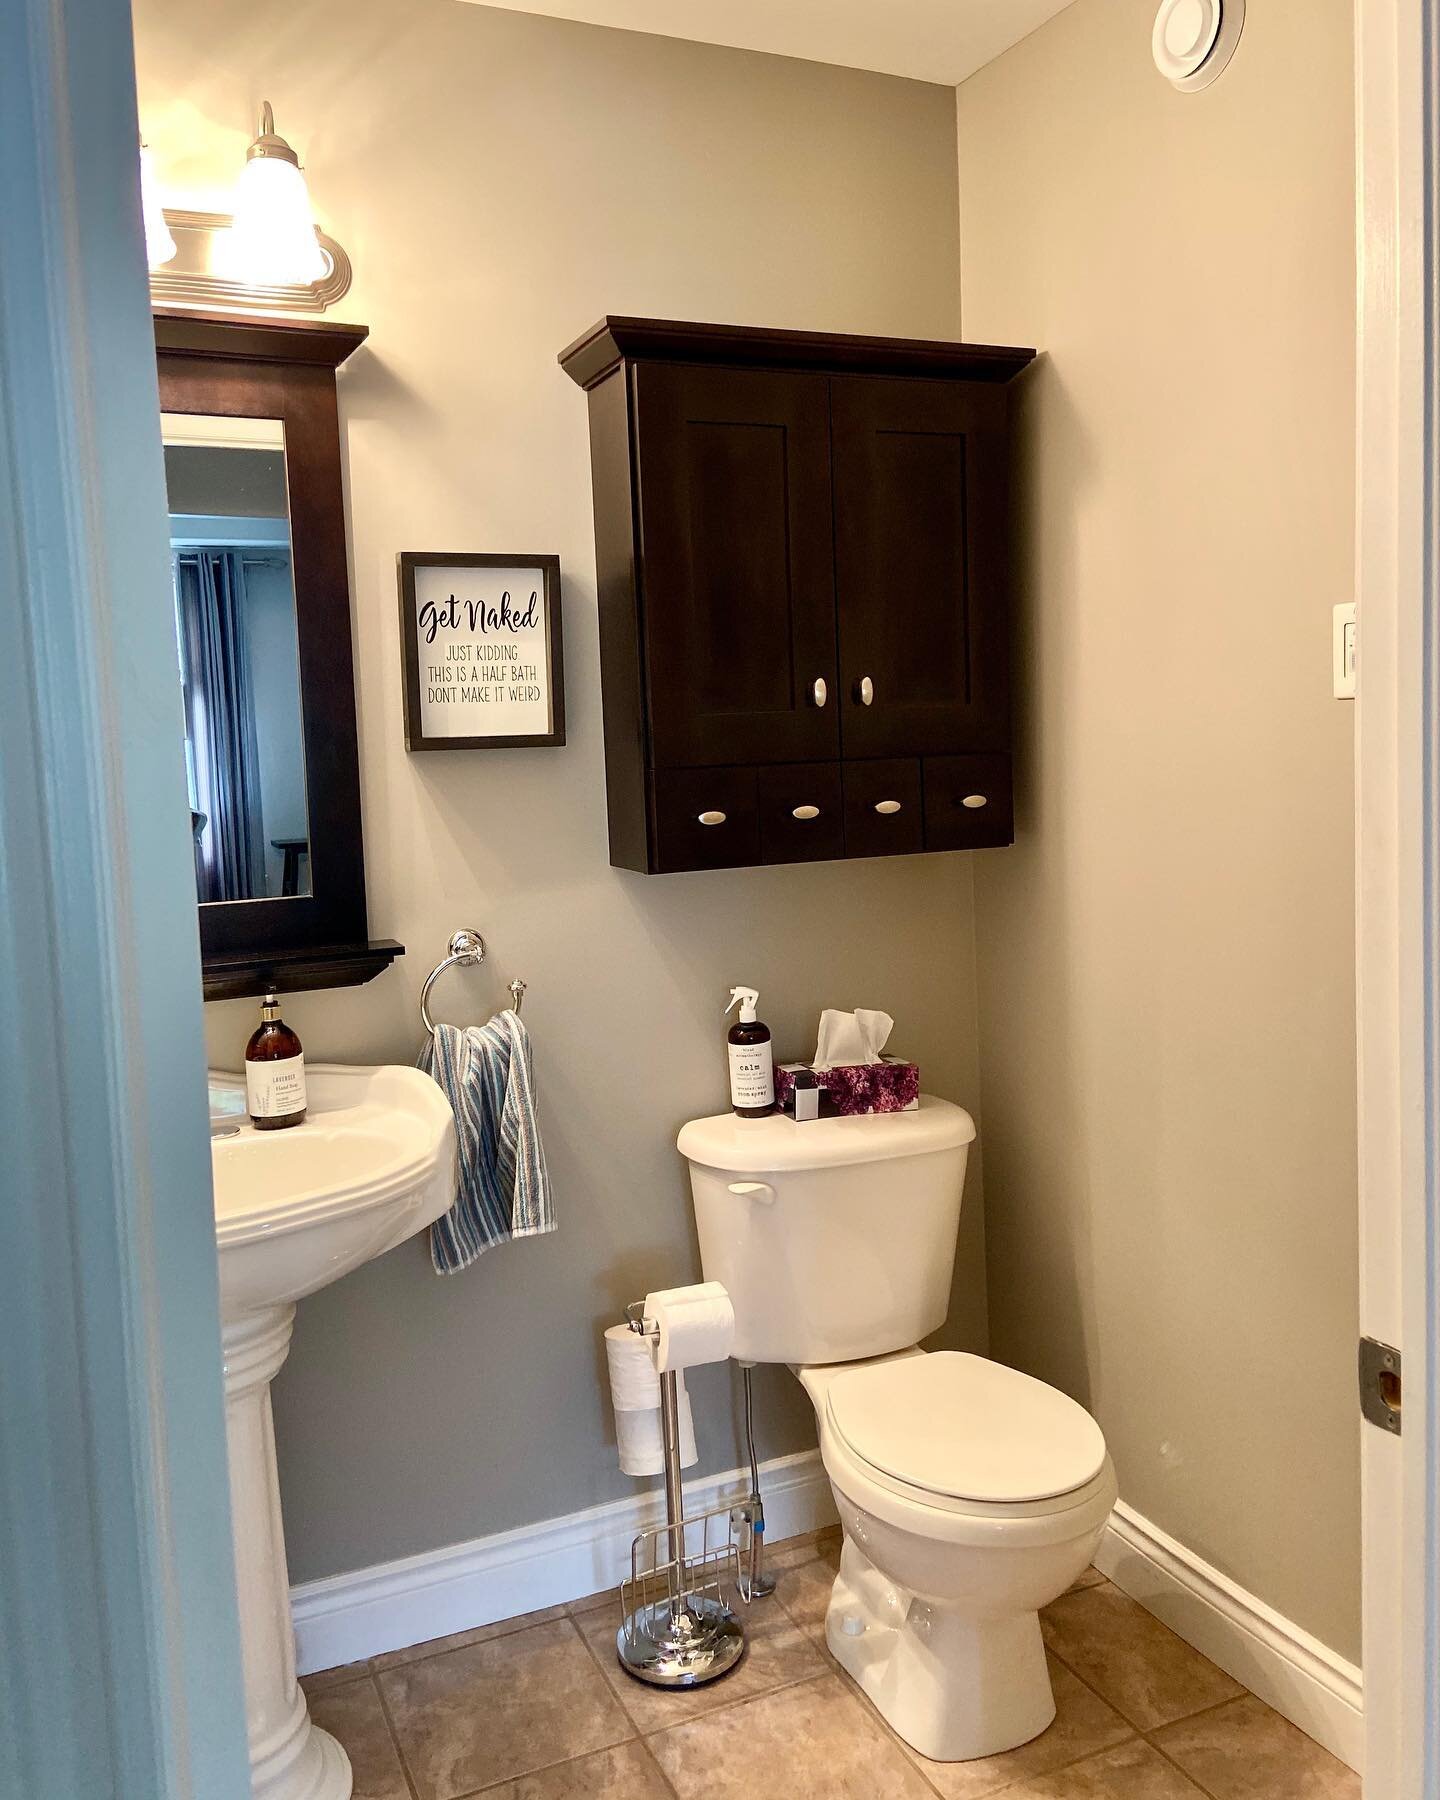 Looking to freshen up your powder room? Why not start with a fresh coat of paint! Give us a call or visit our website at www.elitepaint.ca to get your free quote!